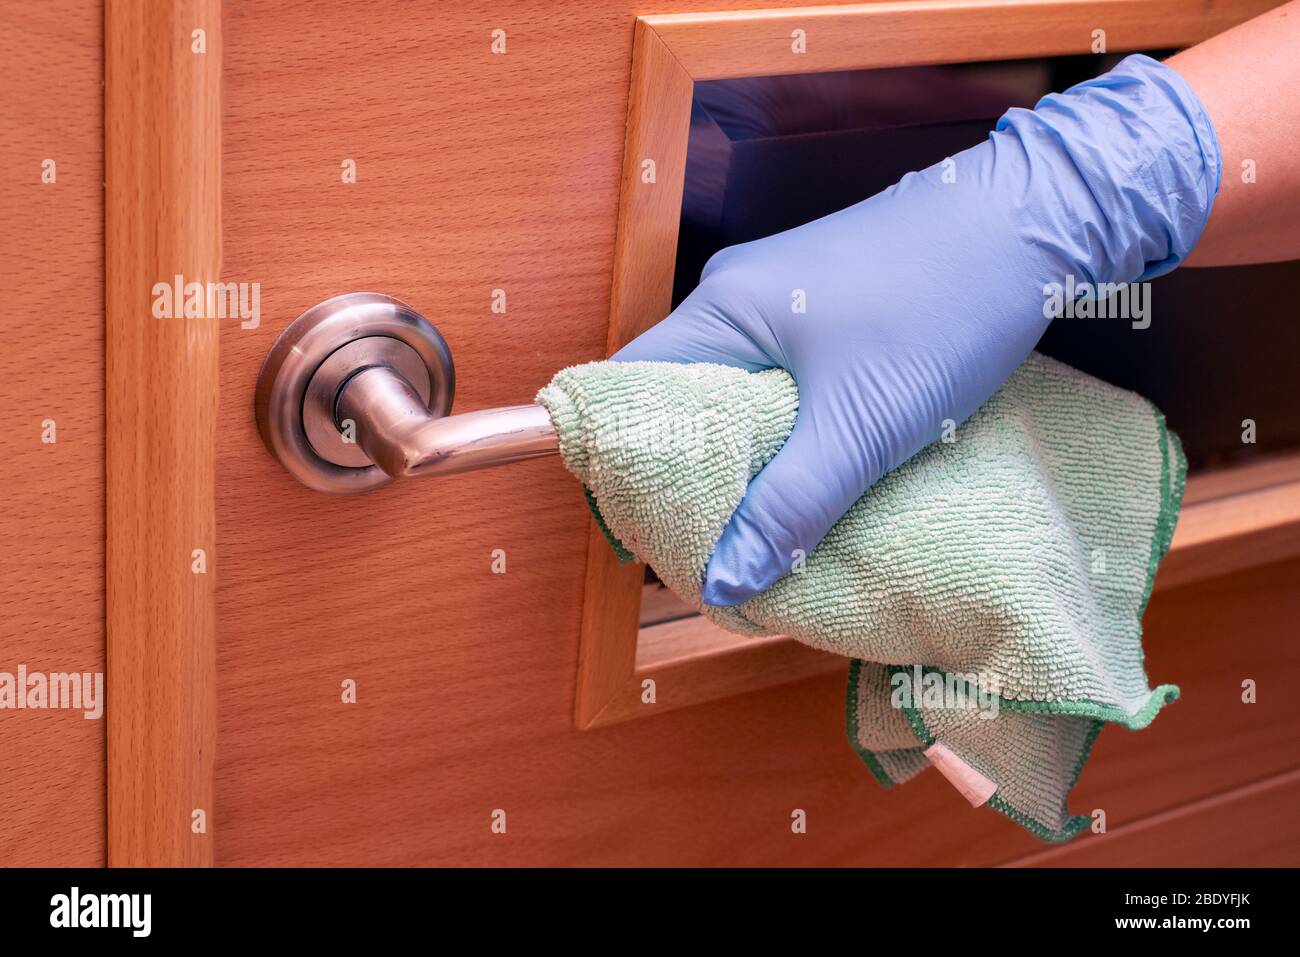 Hand cleaning and disinfecting a door handle Stock Photo